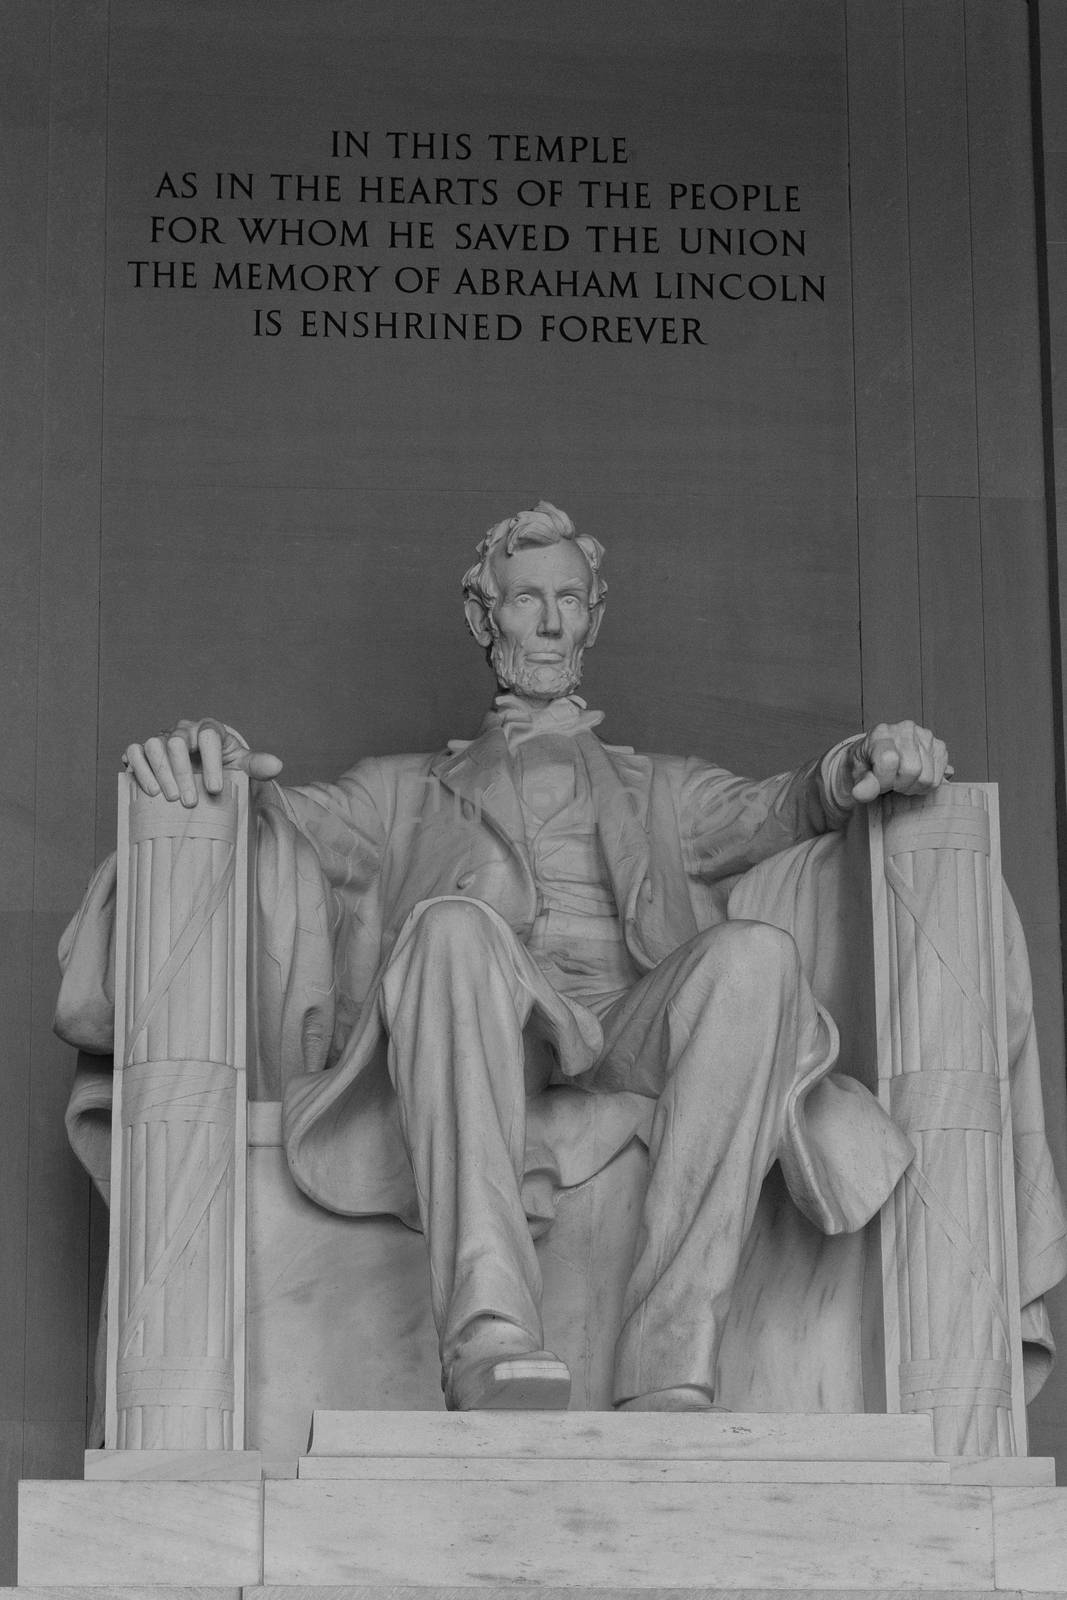 Lincoln Memorial inside view and inscription by chrisukphoto